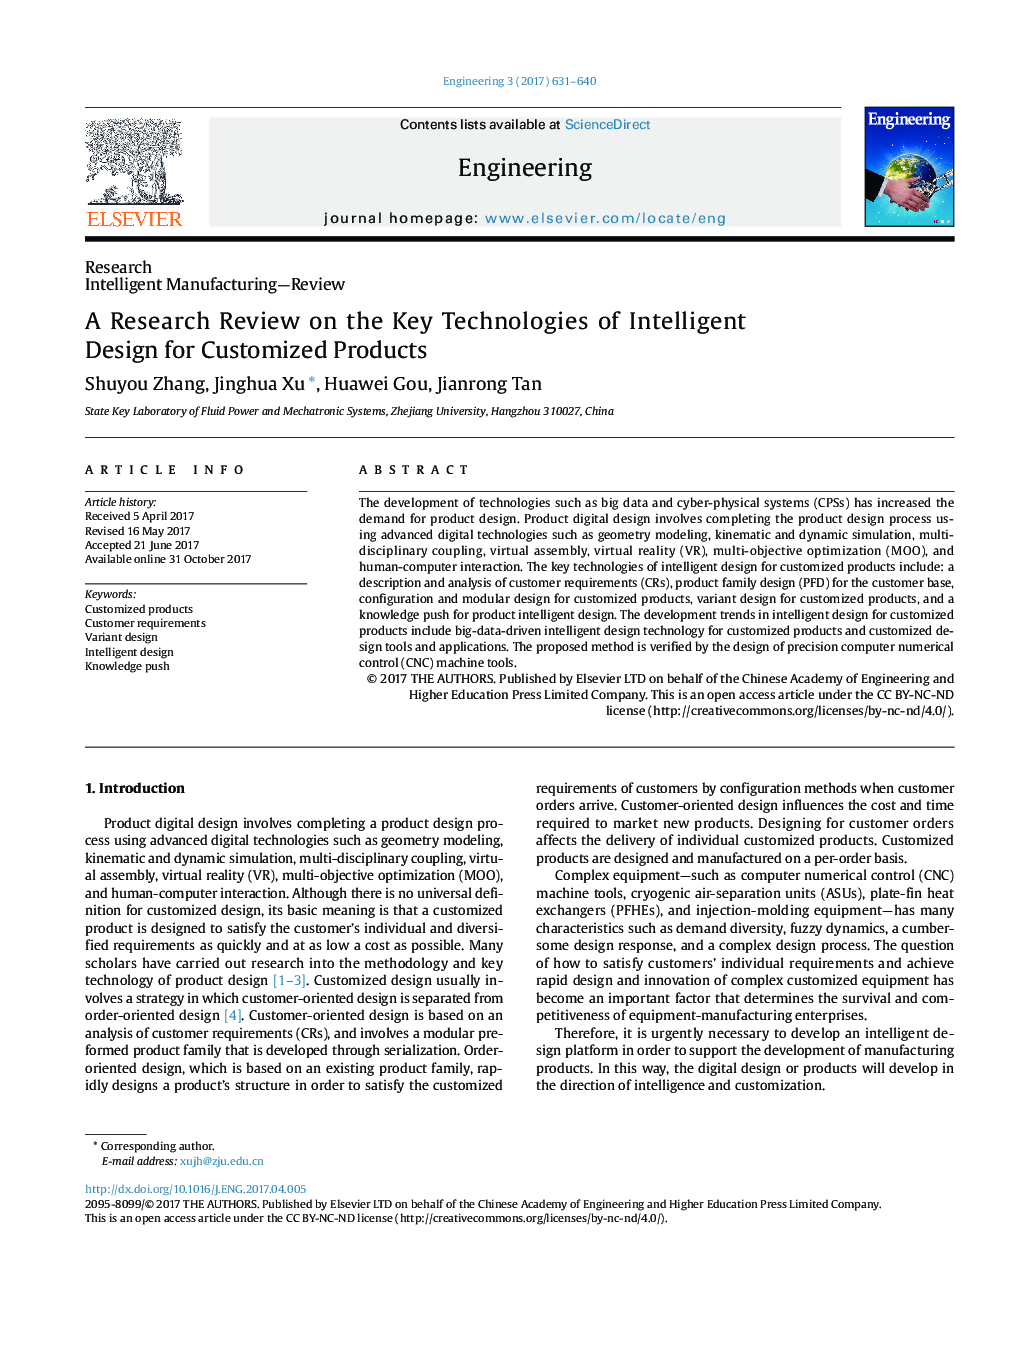 A Research Review on the Key Technologies of Intelligent Design for Customized Products